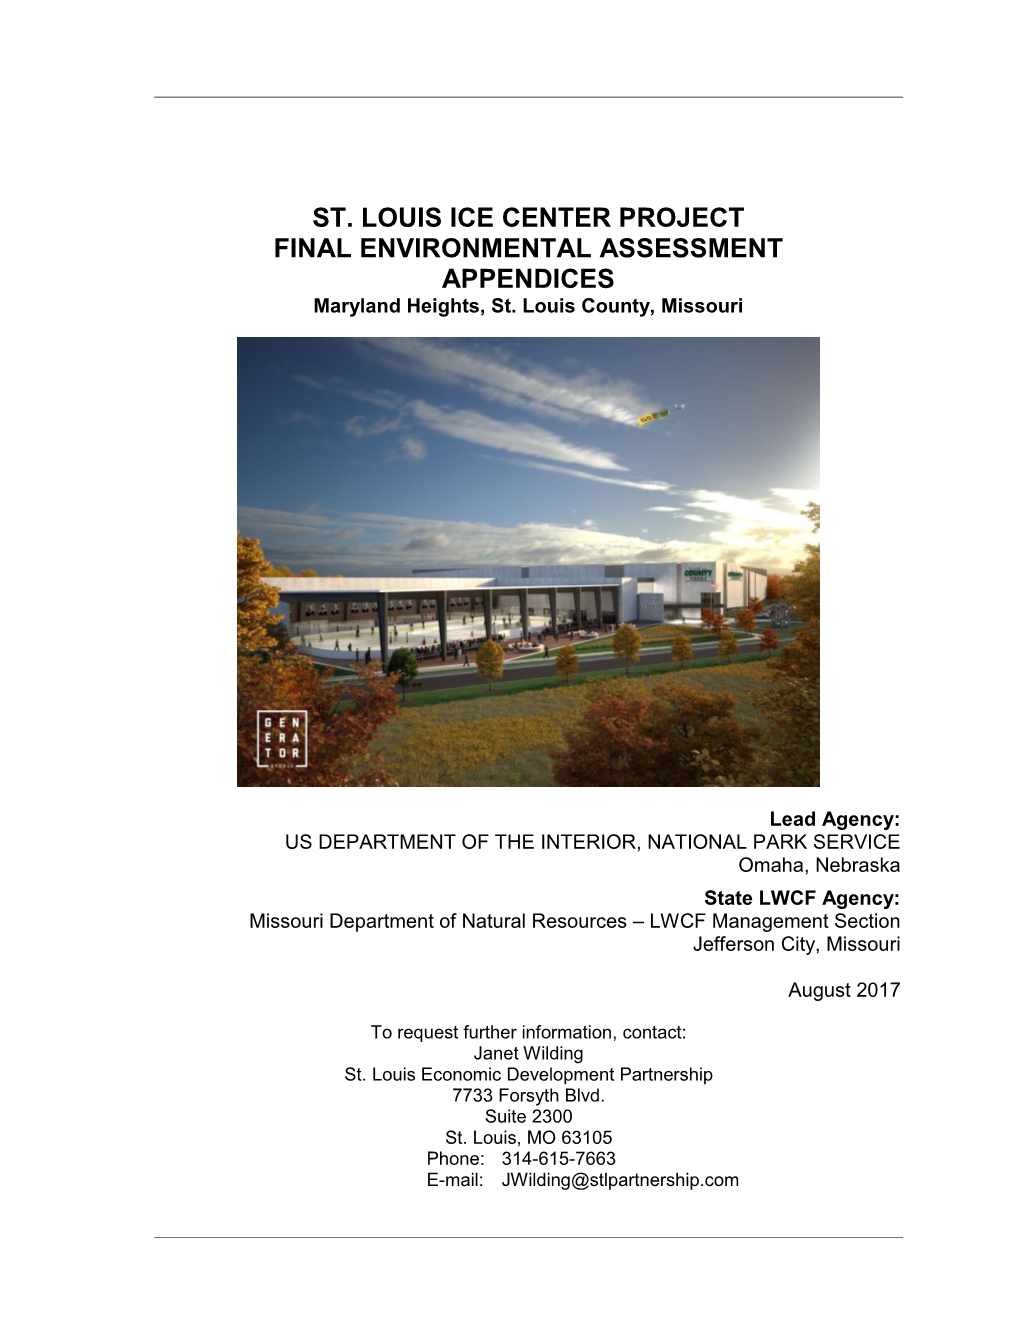 ST. LOUIS ICE CENTER PROJECT FINAL ENVIRONMENTAL ASSESSMENT APPENDICES Maryland Heights, St